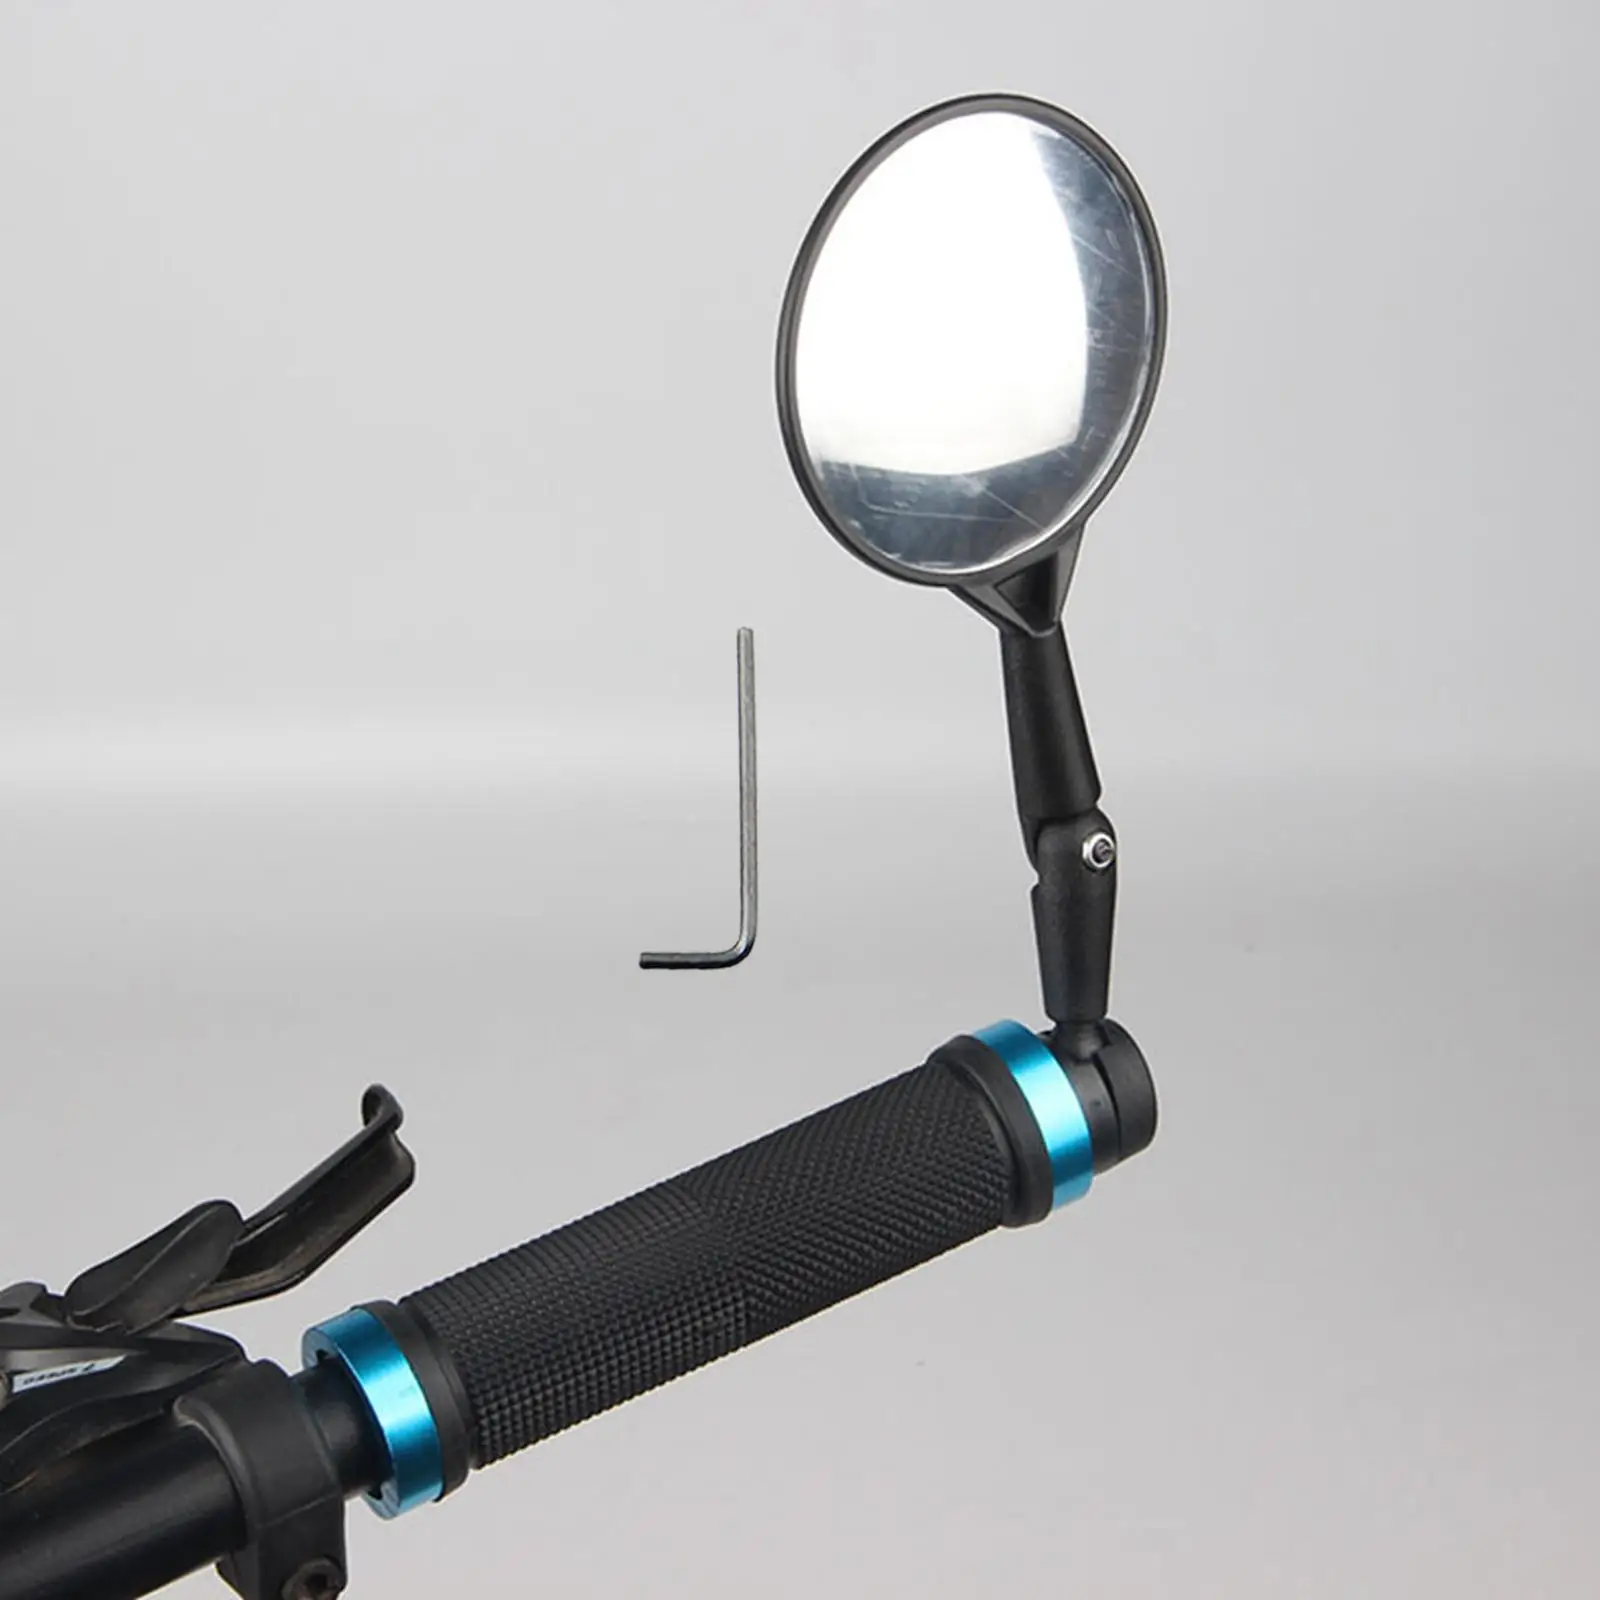 Adjustable Bicycle Convex Rearview Mirror MTB Road Mountain Bike Handlebar Cycling Rear View Mirrors Bike Mirror Safety Tool